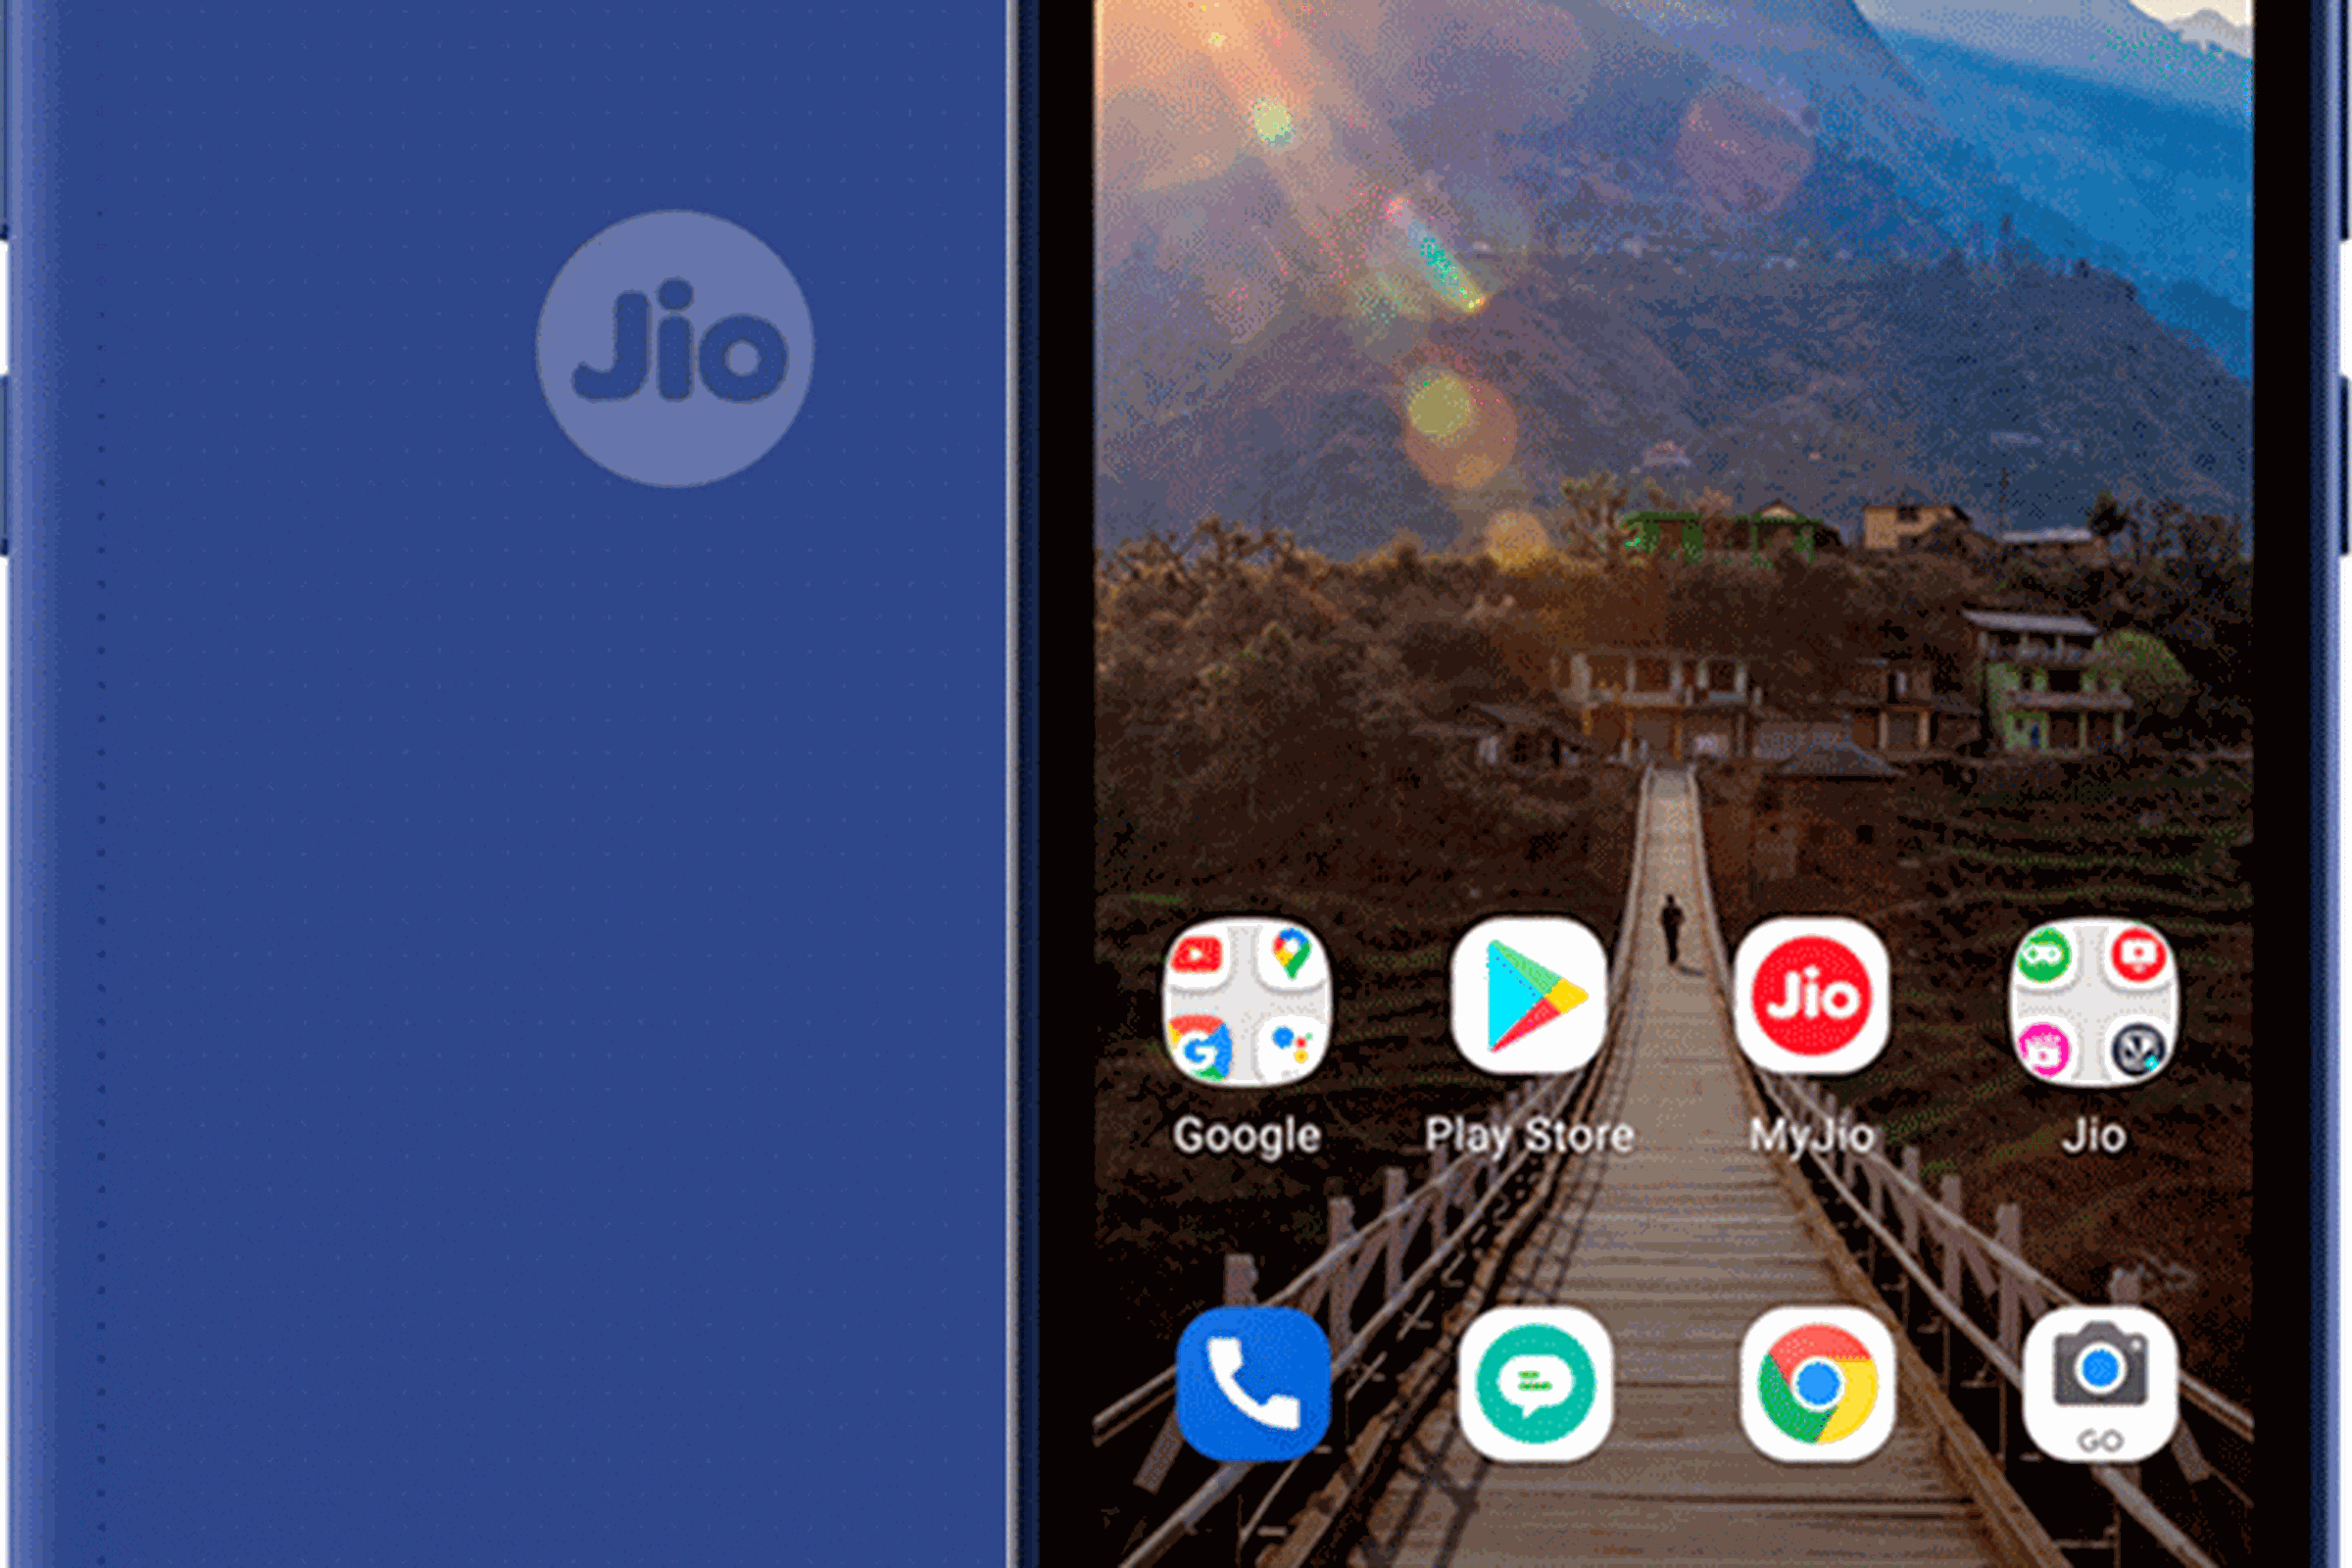 The new JioPhone Next is a collaboration between Google and Indian telecom Jio Platforms.